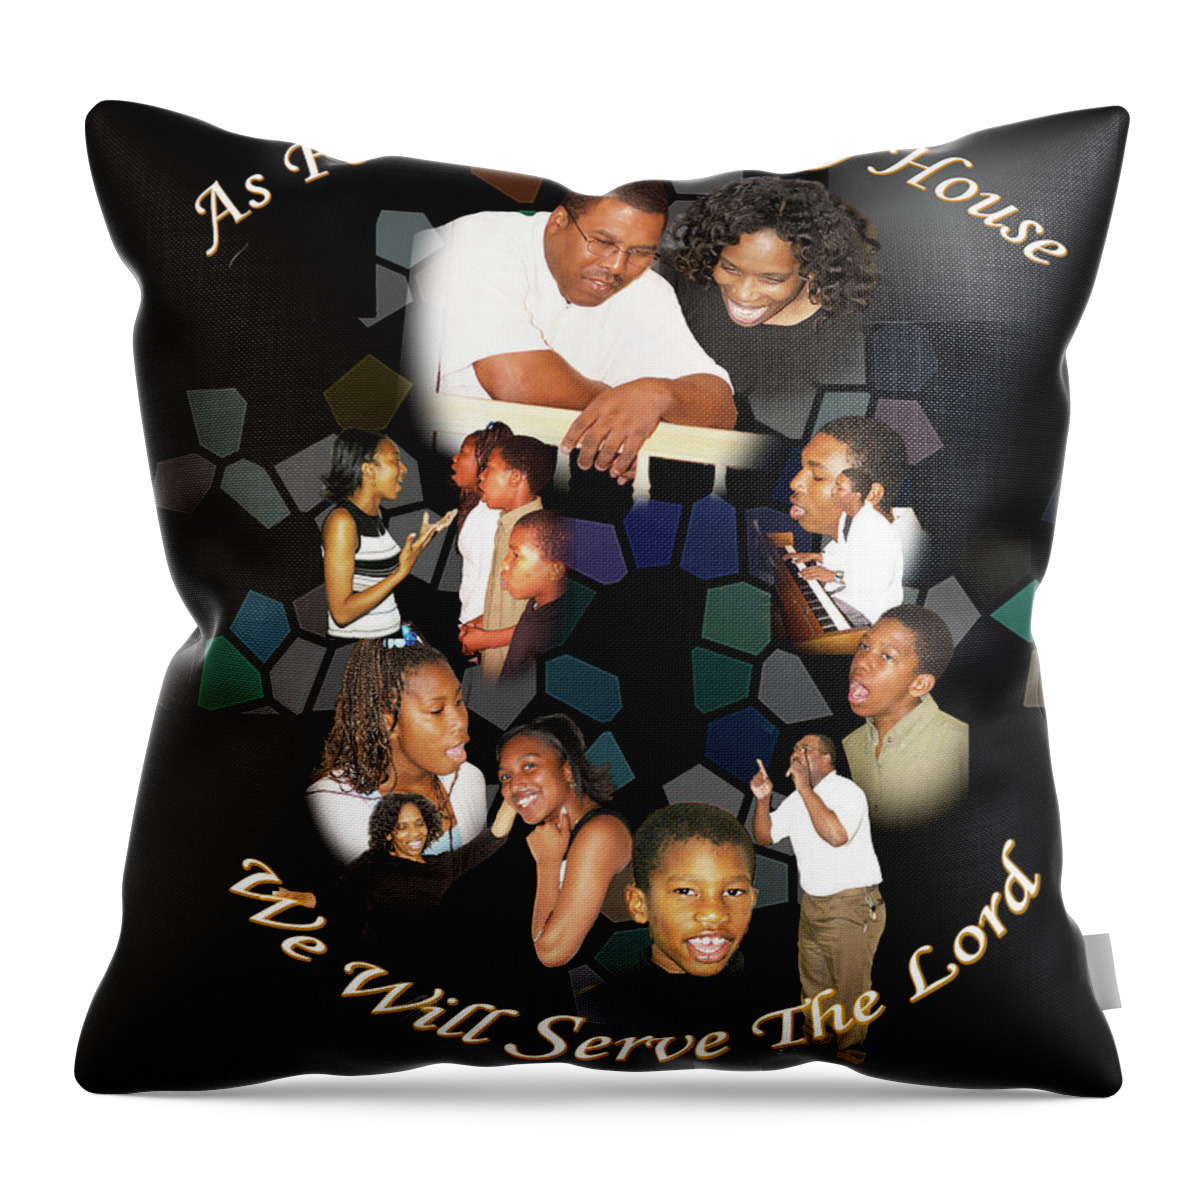  Throw Pillow featuring the photograph As For My House by Richard Gordon